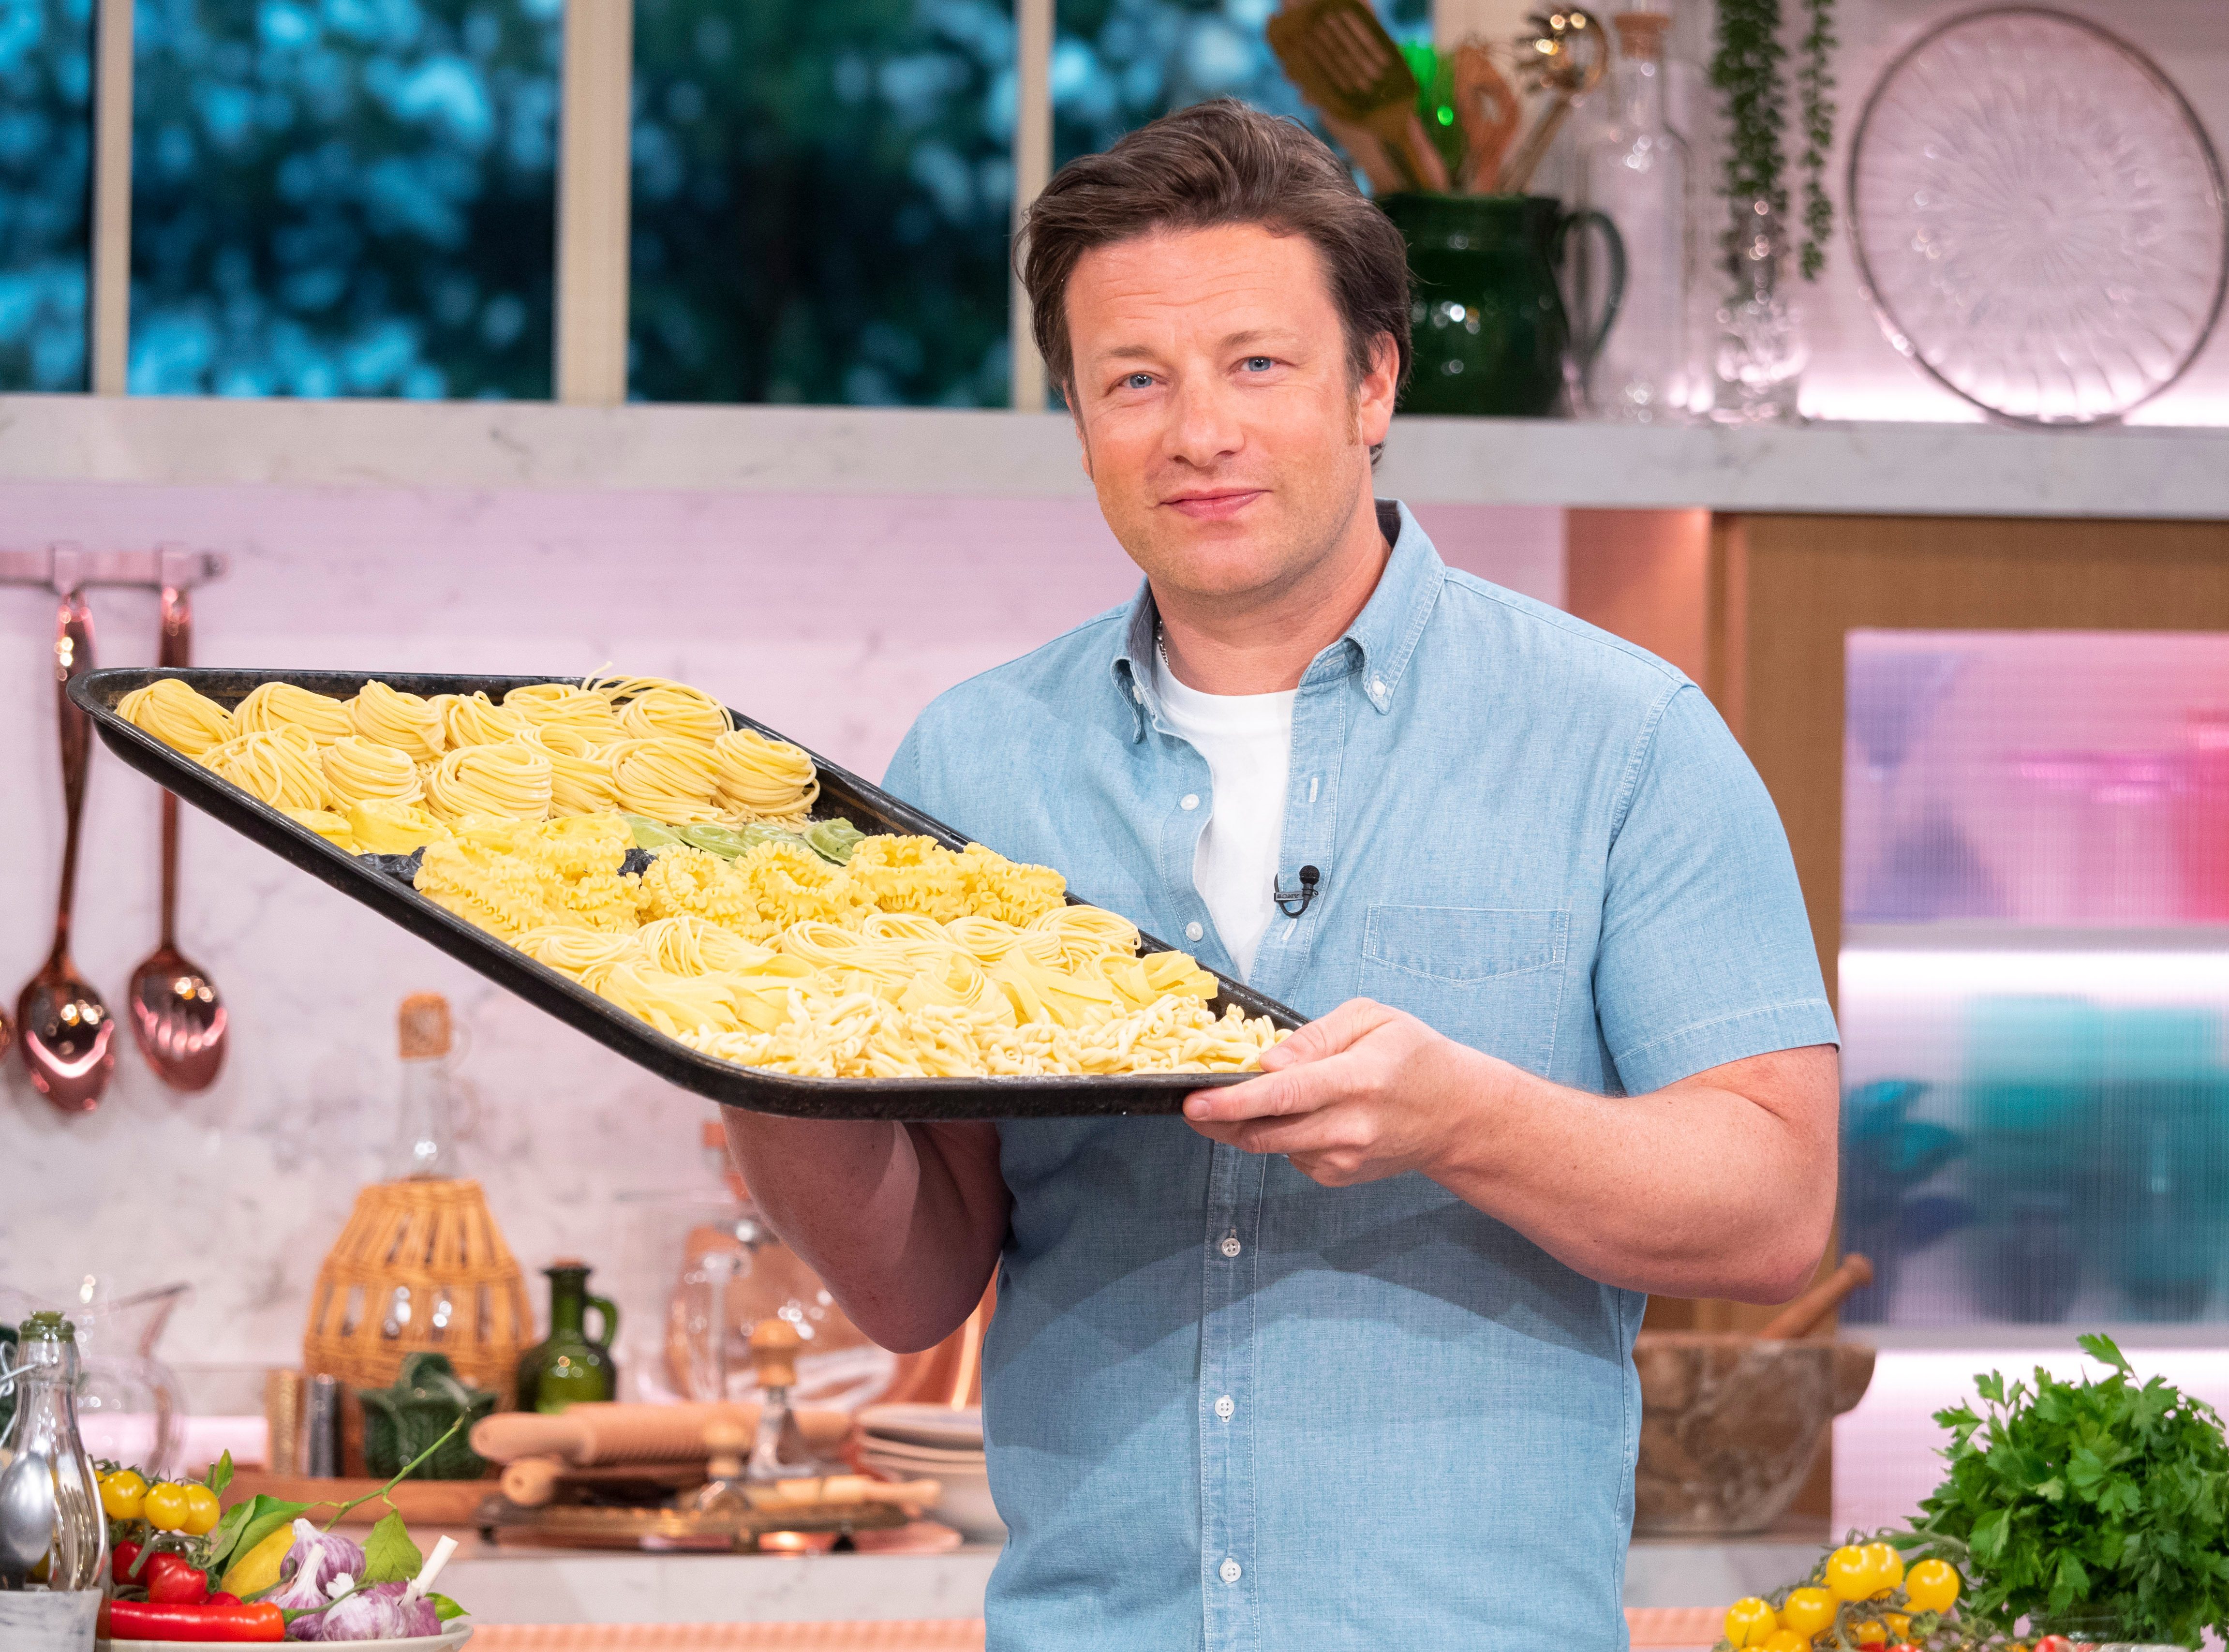 Jamie Oliver Shares 5 Easy Recipes to Prepare for Your Family